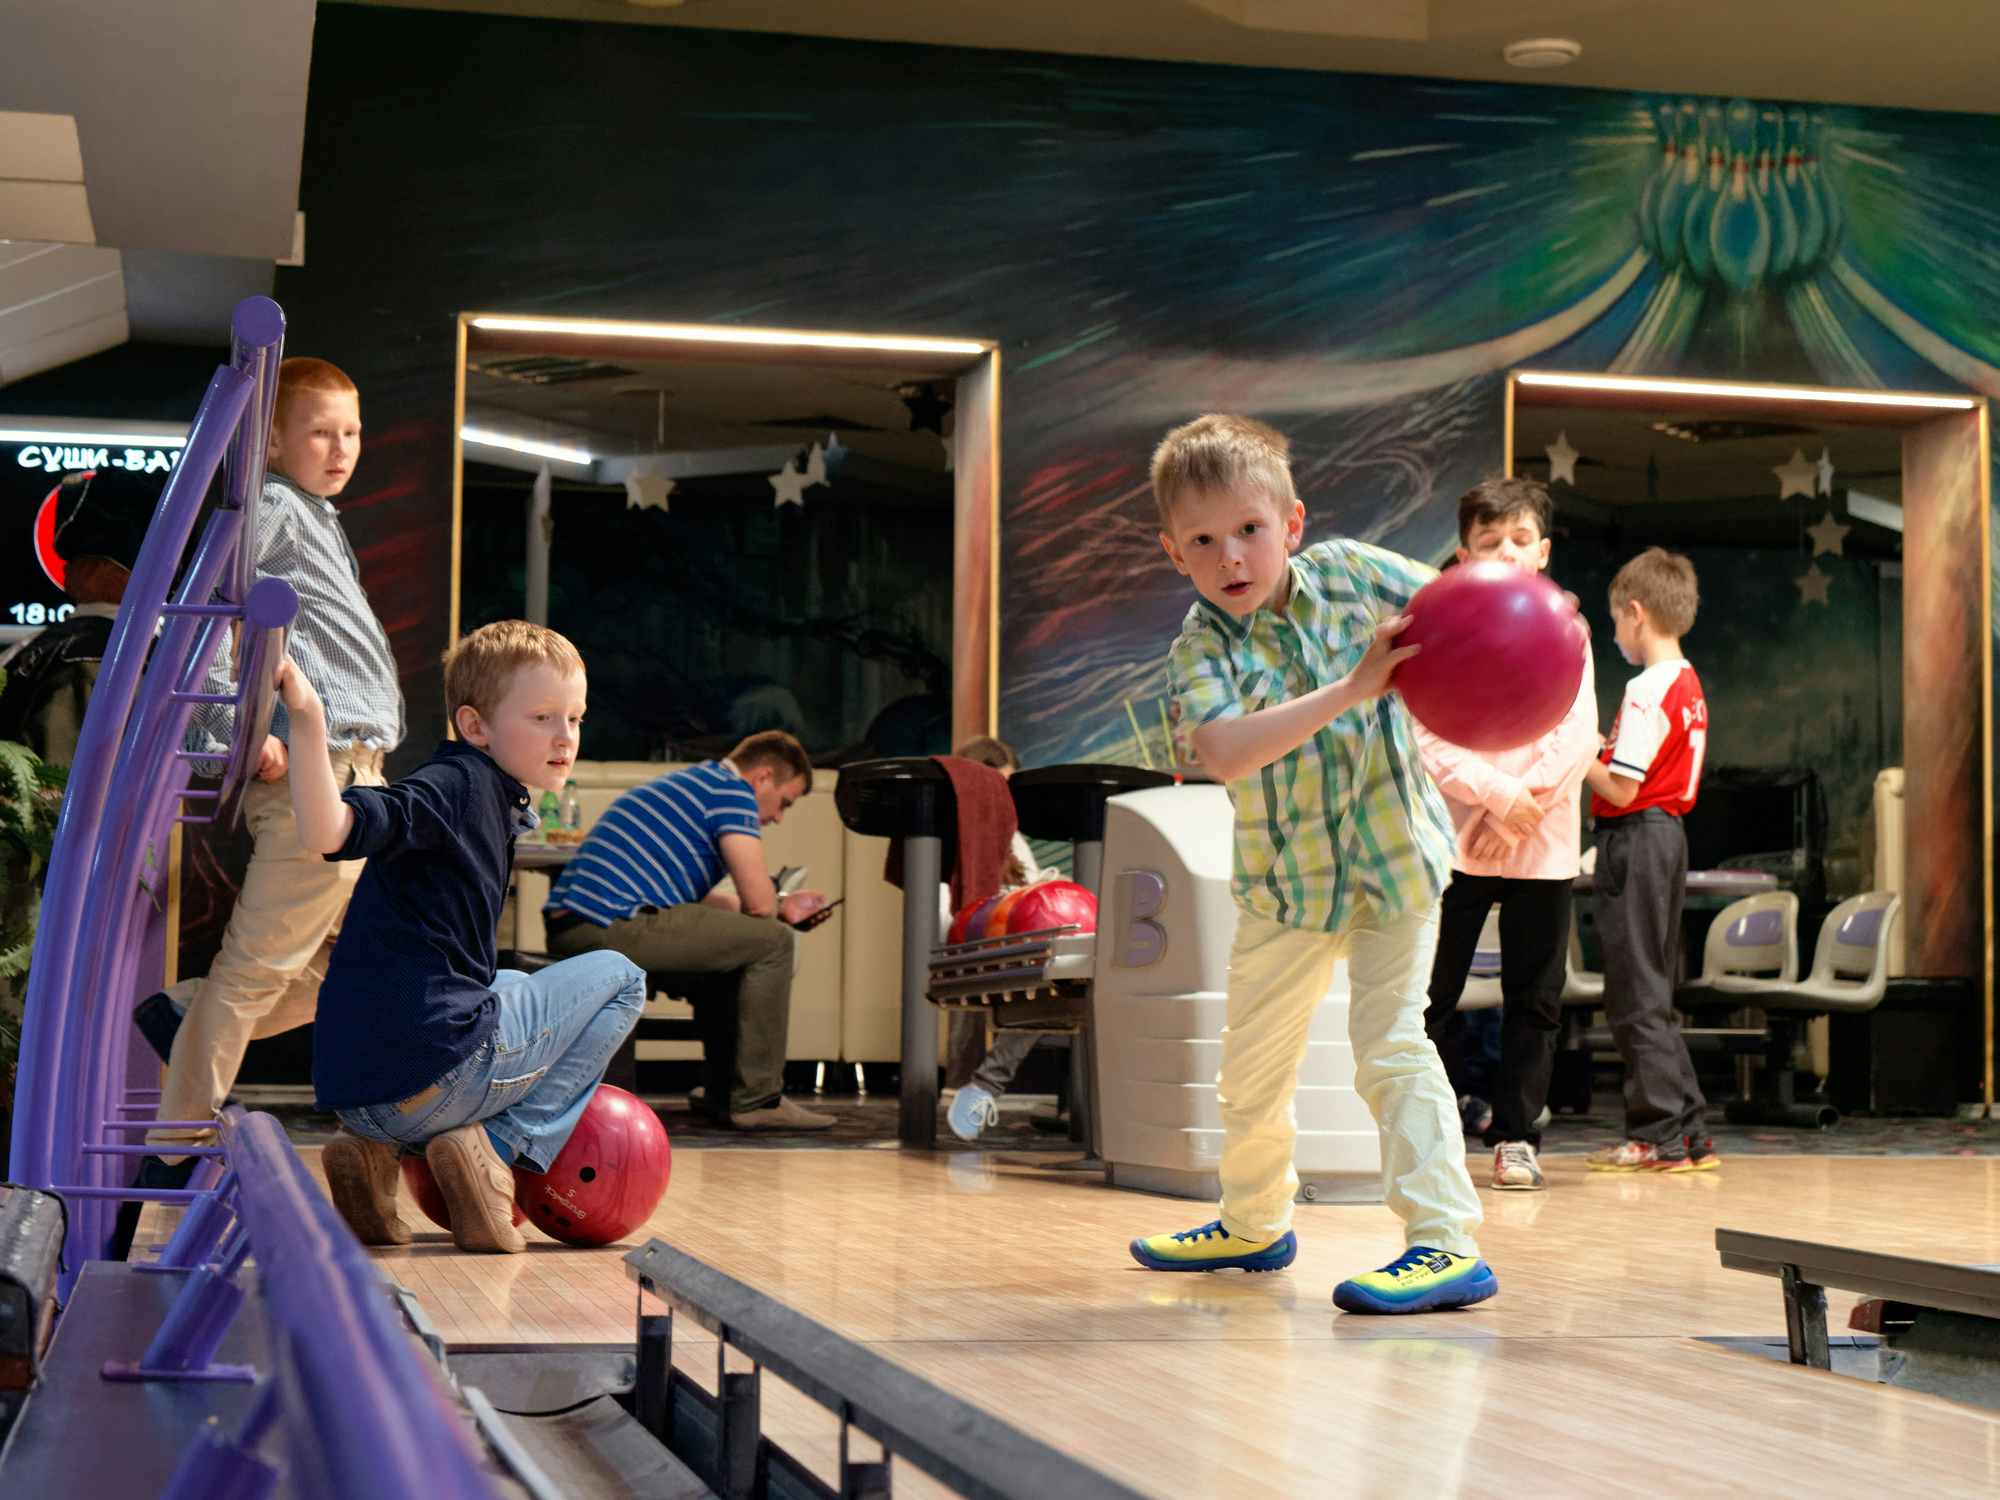 A group of children bowling together 2020